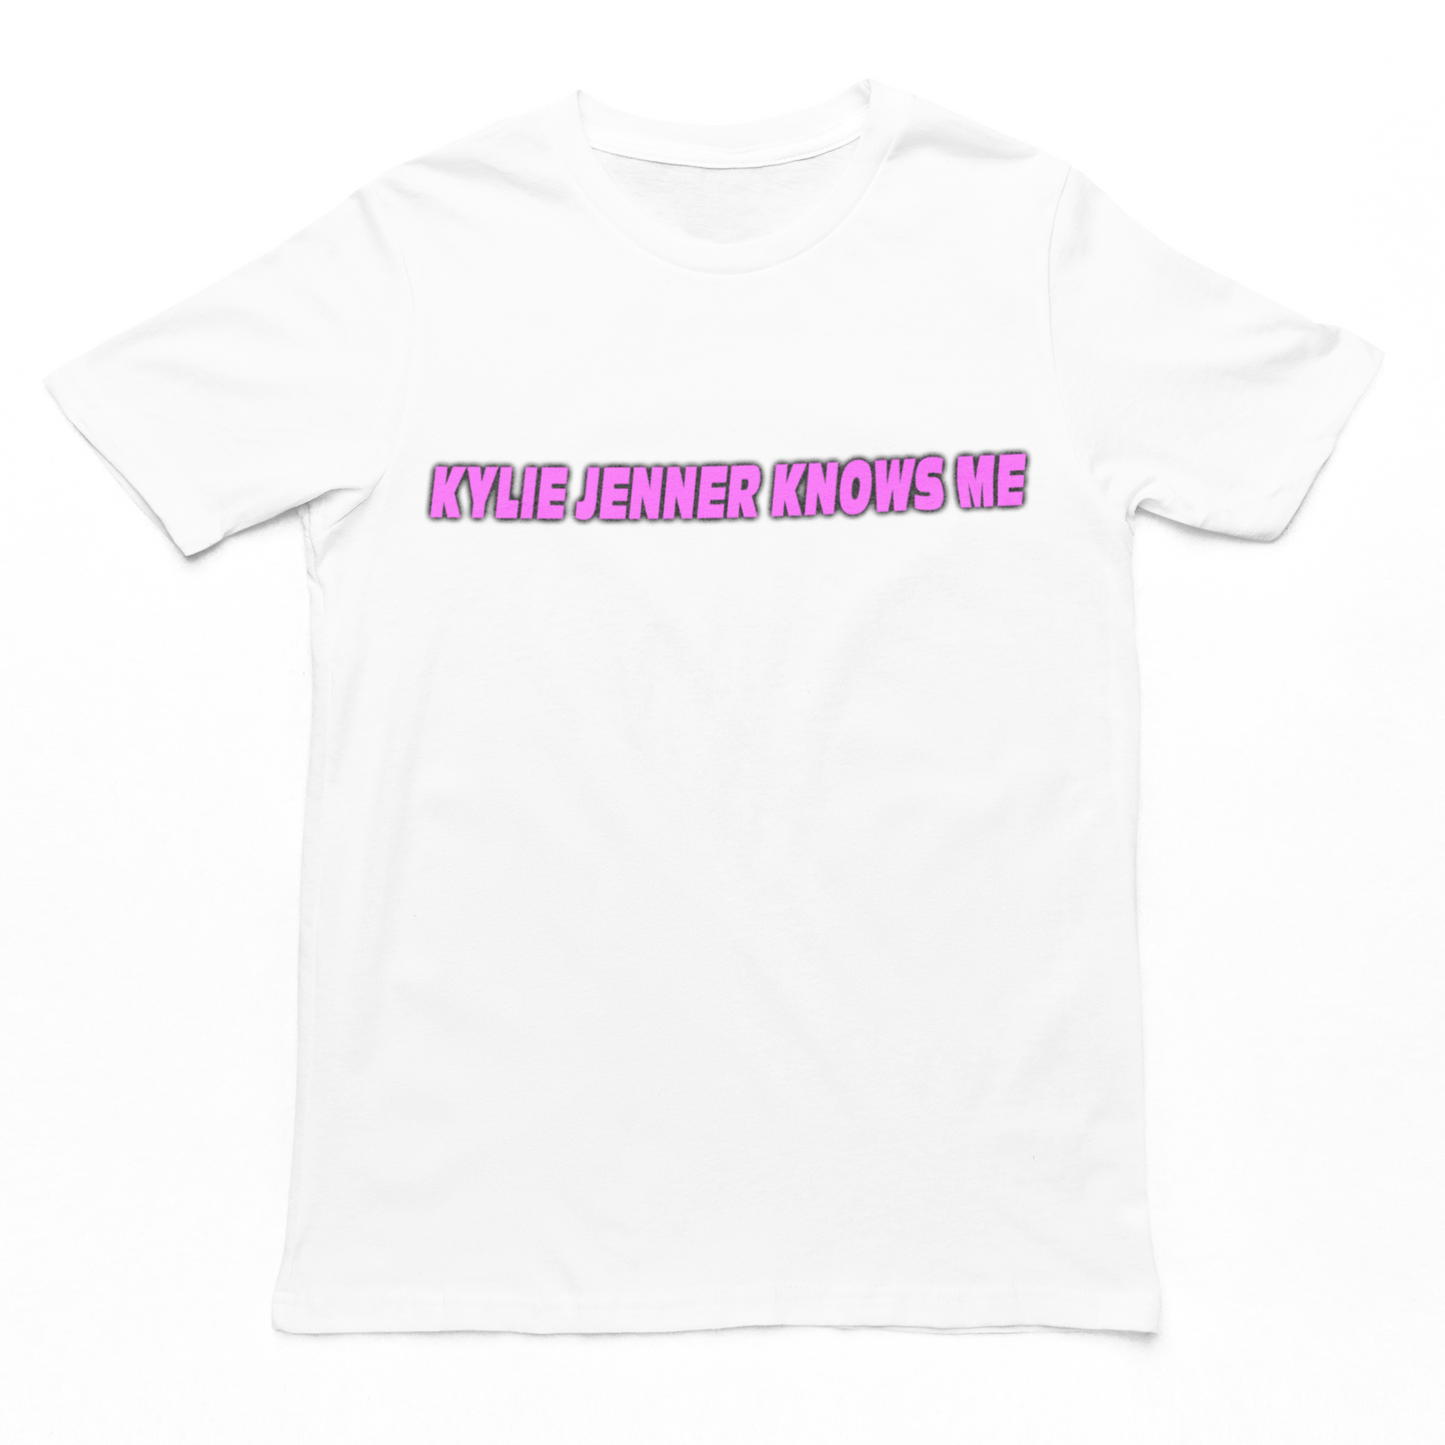 Kylie Jenner Knows Me t-shirt